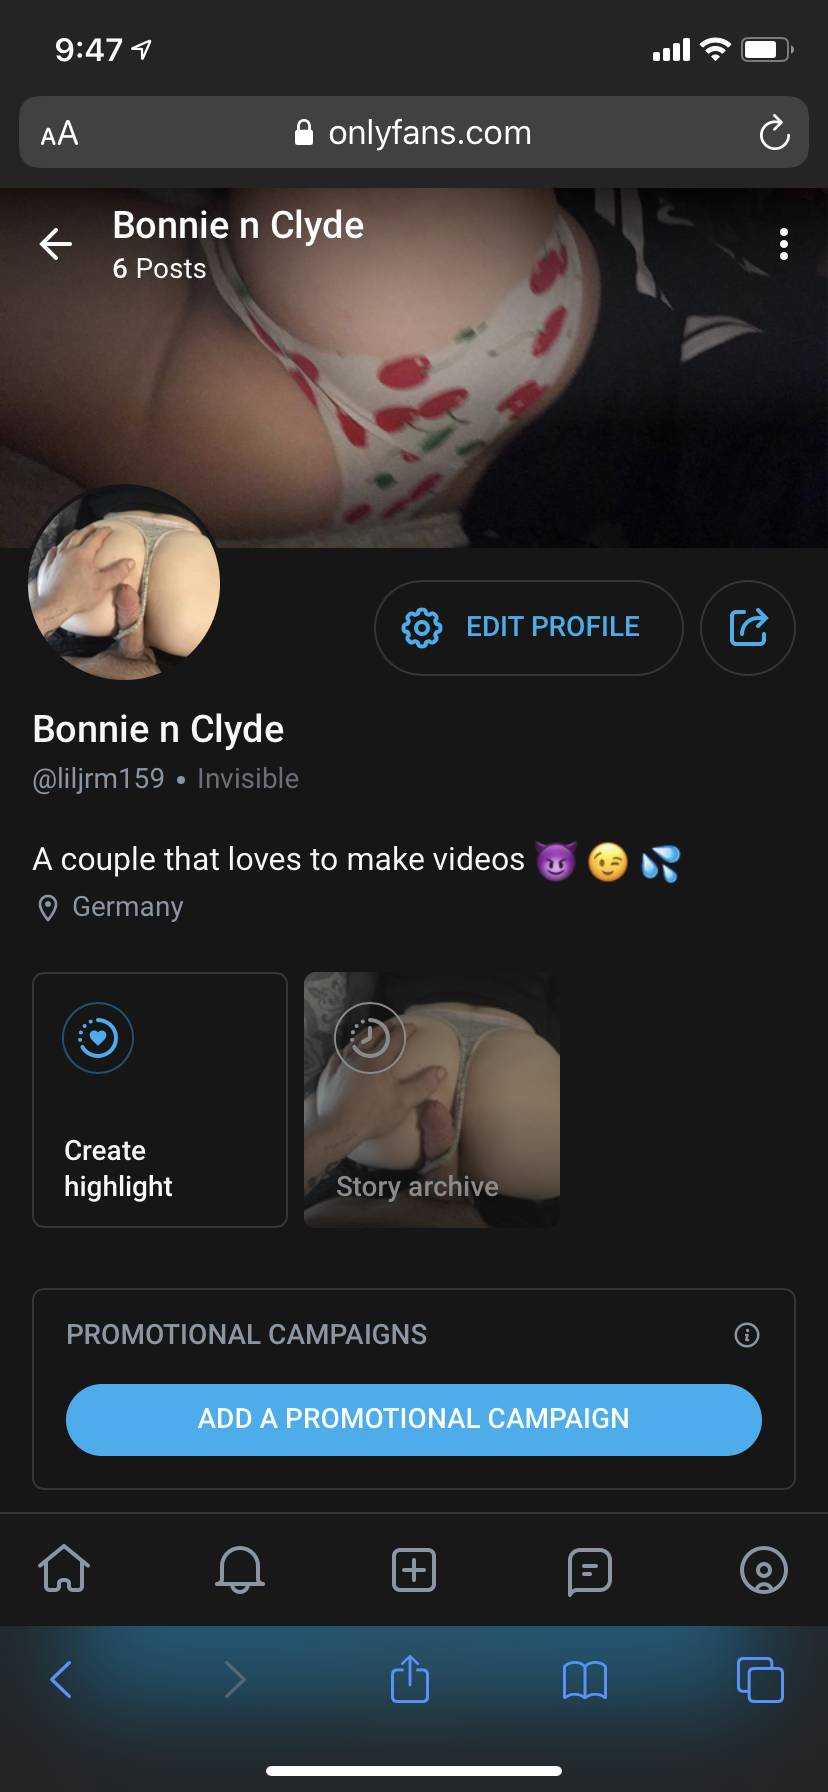 Photo by Bonnie n clyde with the username @liljman58, posted on August 27, 2020